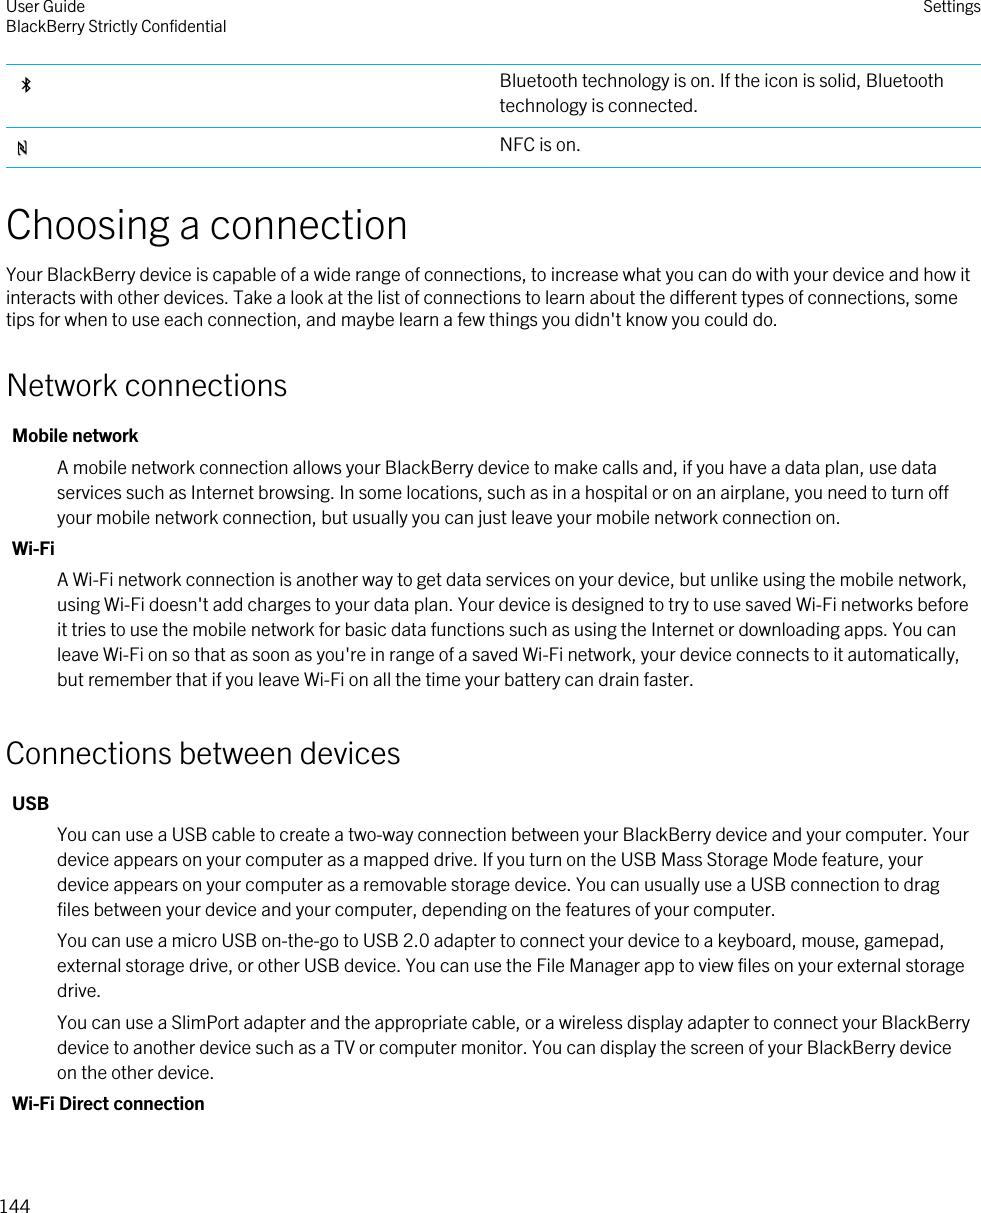 Bluetooth technology is on. If the icon is solid, Bluetooth technology is connected.NFC is on.Choosing a connectionYour BlackBerry device is capable of a wide range of connections, to increase what you can do with your device and how it interacts with other devices. Take a look at the list of connections to learn about the different types of connections, some tips for when to use each connection, and maybe learn a few things you didn&apos;t know you could do.Network connectionsMobile networkA mobile network connection allows your BlackBerry device to make calls and, if you have a data plan, use data services such as Internet browsing. In some locations, such as in a hospital or on an airplane, you need to turn off your mobile network connection, but usually you can just leave your mobile network connection on.Wi-FiA Wi-Fi network connection is another way to get data services on your device, but unlike using the mobile network, using Wi-Fi doesn&apos;t add charges to your data plan. Your device is designed to try to use saved Wi-Fi networks before it tries to use the mobile network for basic data functions such as using the Internet or downloading apps. You can leave Wi-Fi on so that as soon as you&apos;re in range of a saved Wi-Fi network, your device connects to it automatically, but remember that if you leave Wi-Fi on all the time your battery can drain faster.Connections between devicesUSBYou can use a USB cable to create a two-way connection between your BlackBerry device and your computer. Your device appears on your computer as a mapped drive. If you turn on the USB Mass Storage Mode feature, your device appears on your computer as a removable storage device. You can usually use a USB connection to drag files between your device and your computer, depending on the features of your computer.You can use a micro USB on-the-go to USB 2.0 adapter to connect your device to a keyboard, mouse, gamepad, external storage drive, or other USB device. You can use the File Manager app to view files on your external storage drive.You can use a SlimPort adapter and the appropriate cable, or a wireless display adapter to connect your BlackBerry device to another device such as a TV or computer monitor. You can display the screen of your BlackBerry device on the other device.Wi-Fi Direct connectionUser GuideBlackBerry Strictly Confidential Settings144